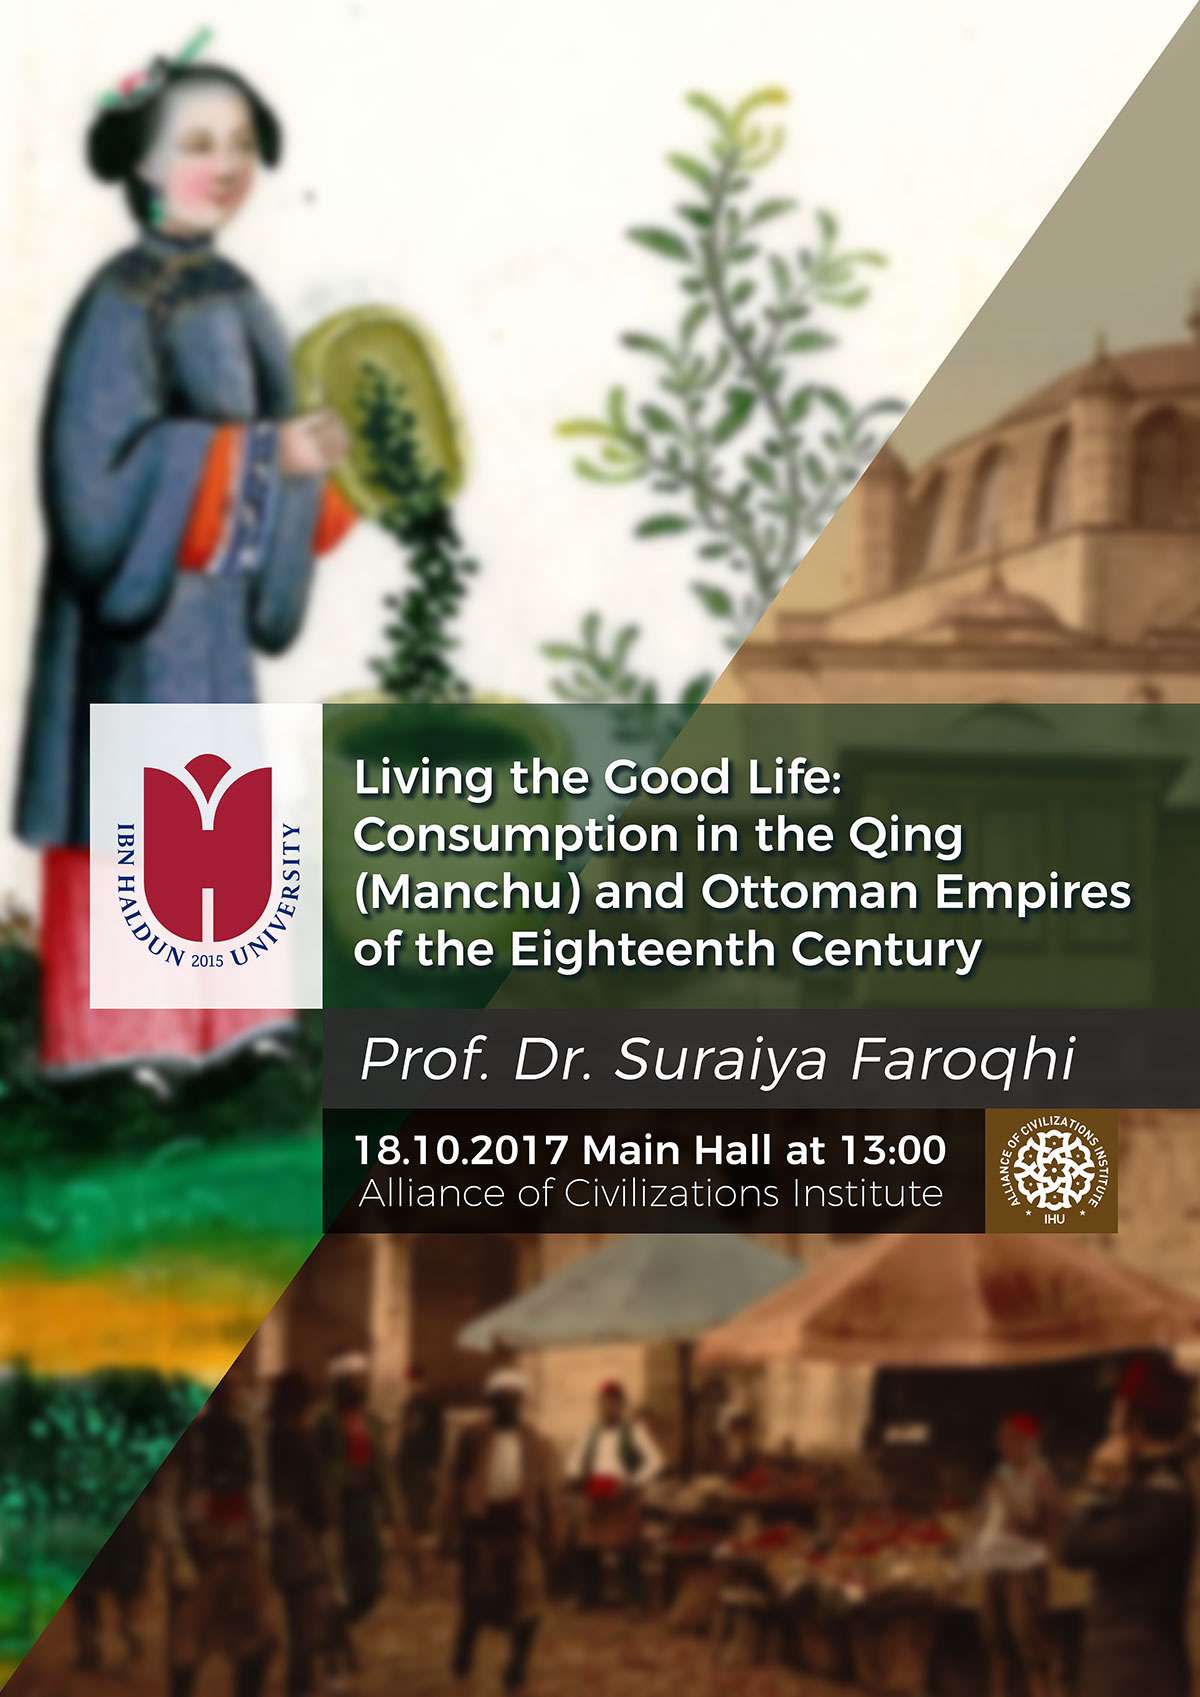 Living the Good Life: Consumption in the Qing (Manchu) and Ottoman Empires of the Eighteenth Century